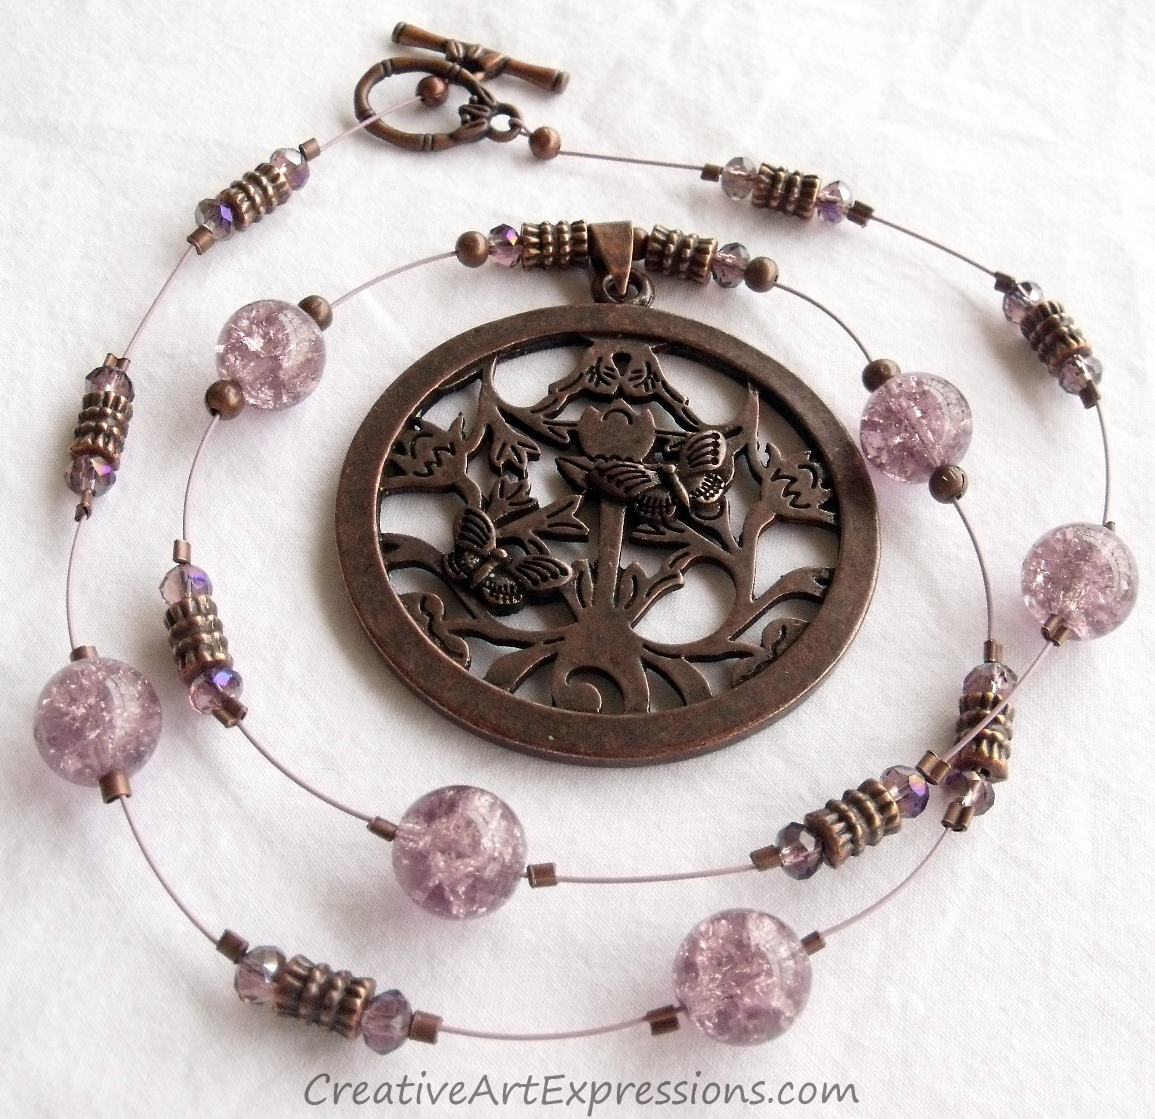 Creative Art Expressions Handmade Antique Bronze & Mauve Butterfly Necklace Jewelry Design